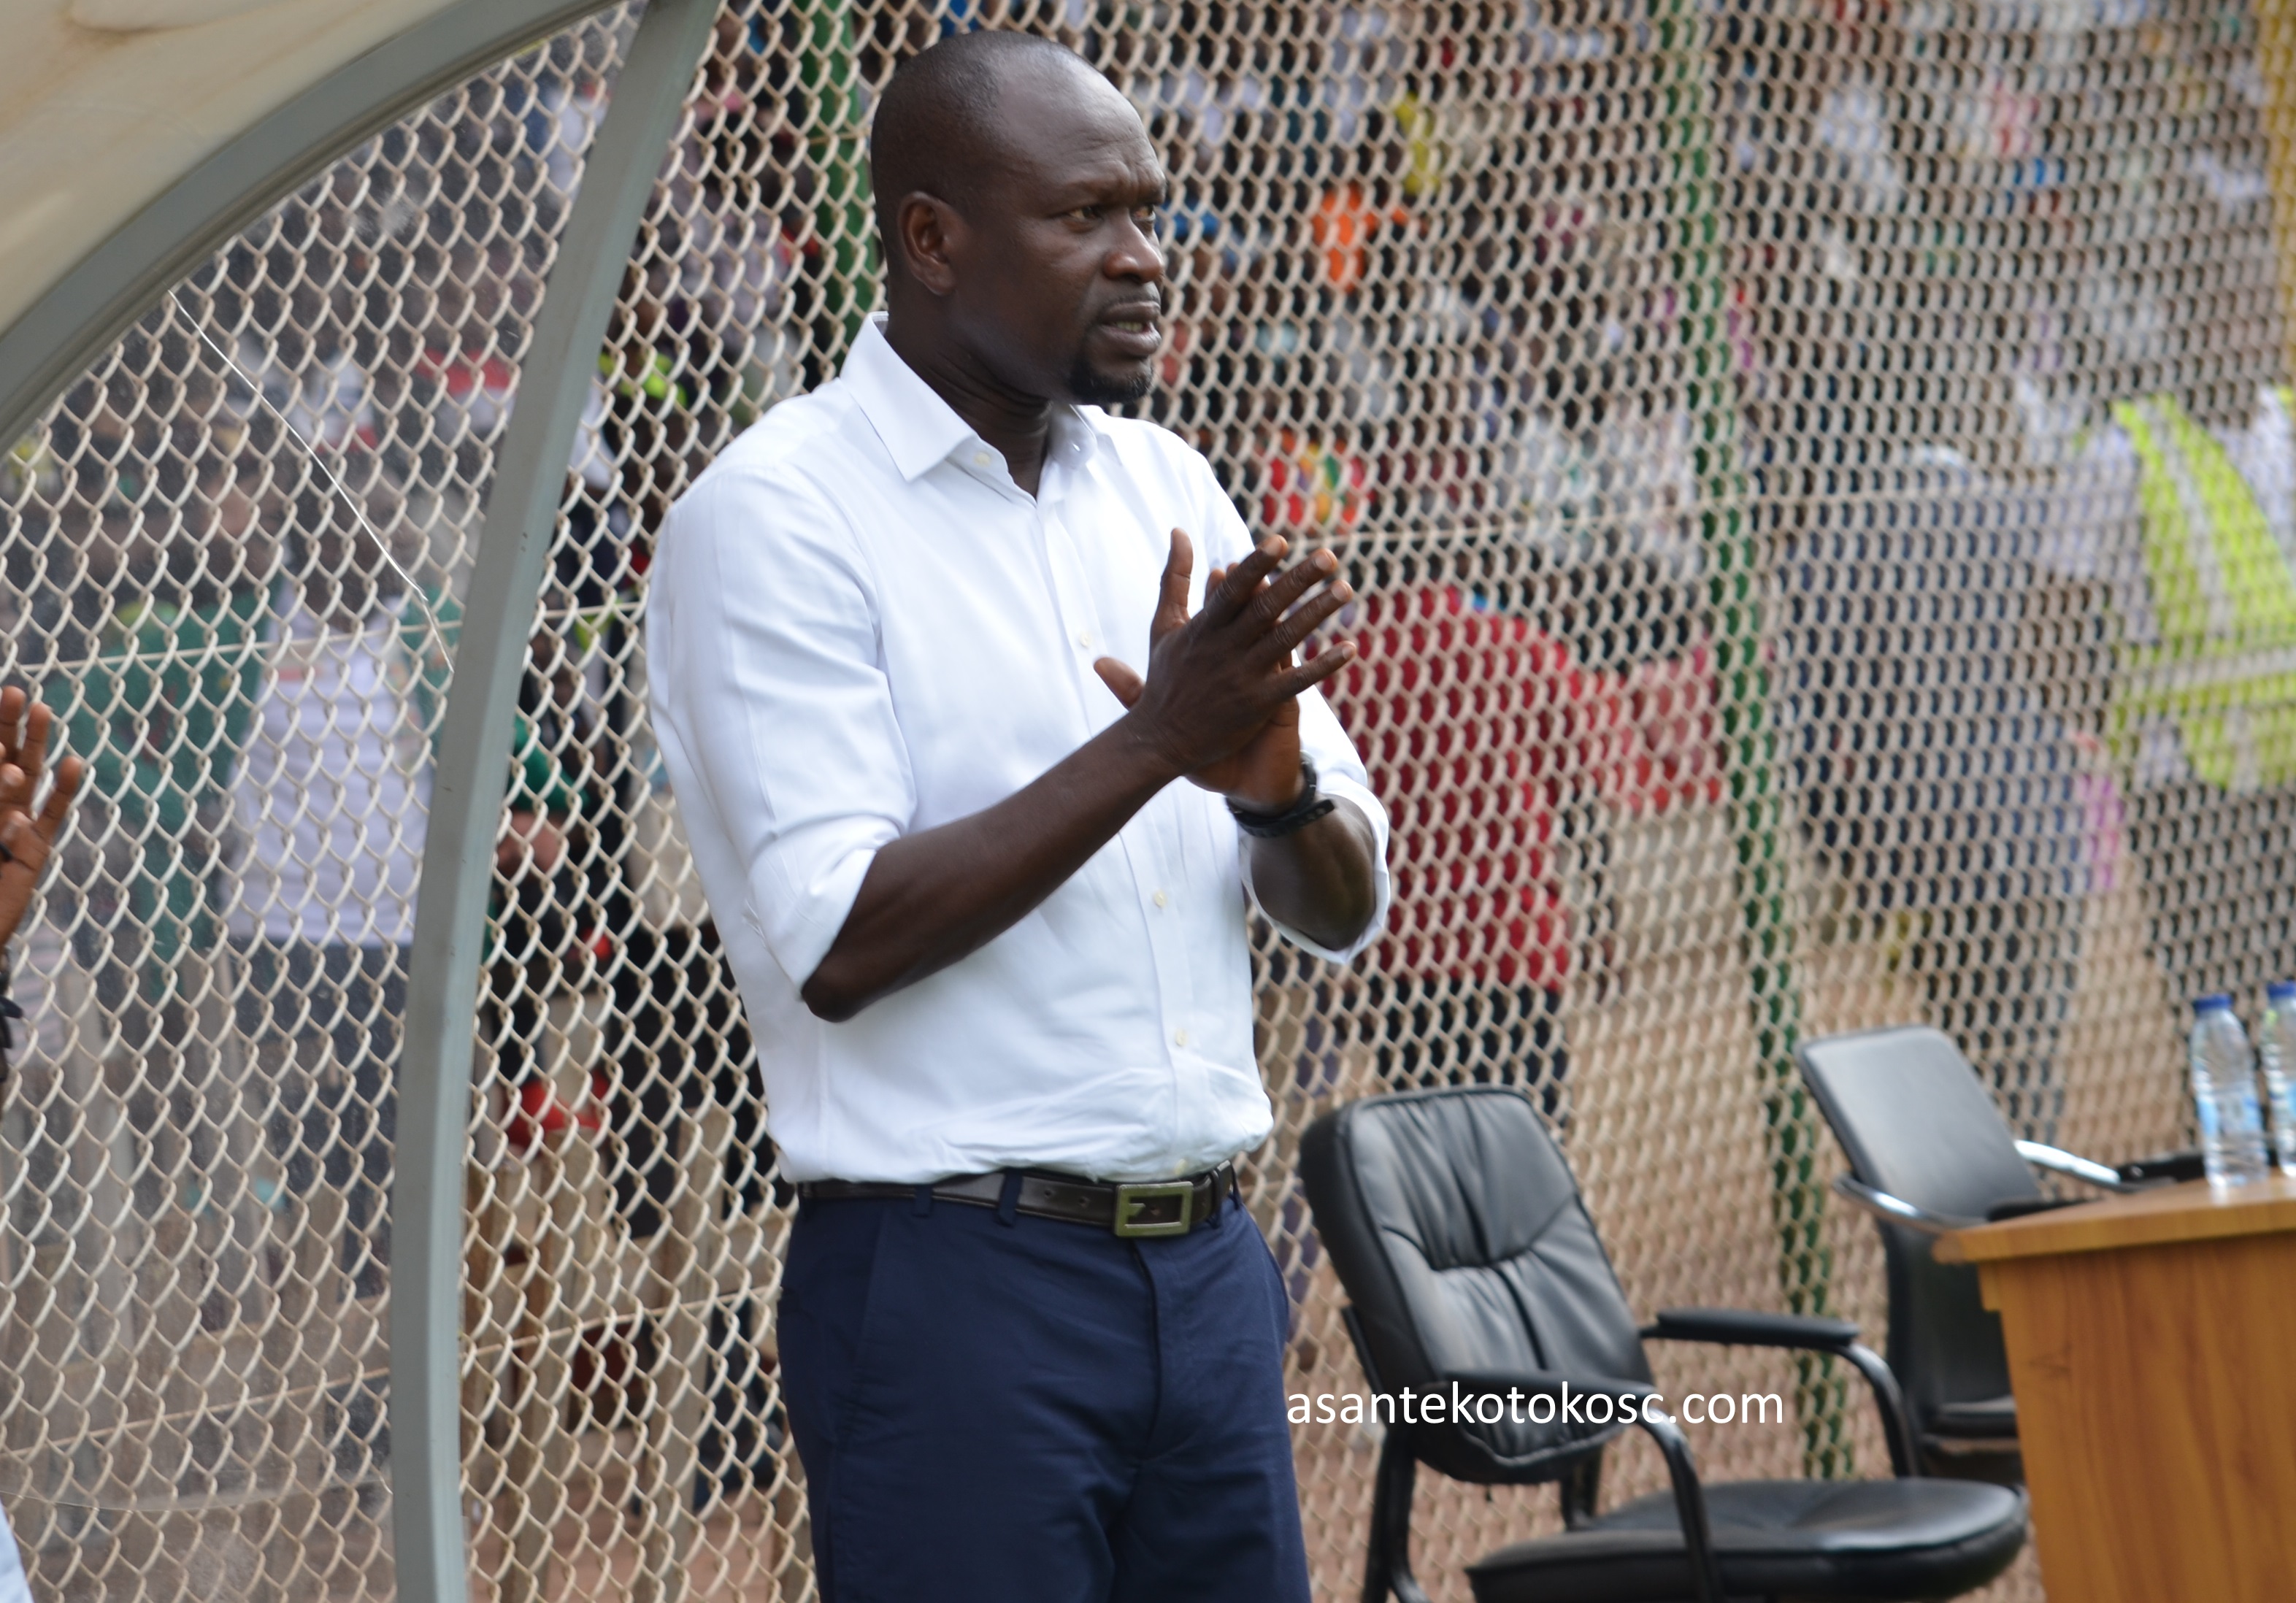 CK Akonnor admits difficulty in selecting players for Black Stars